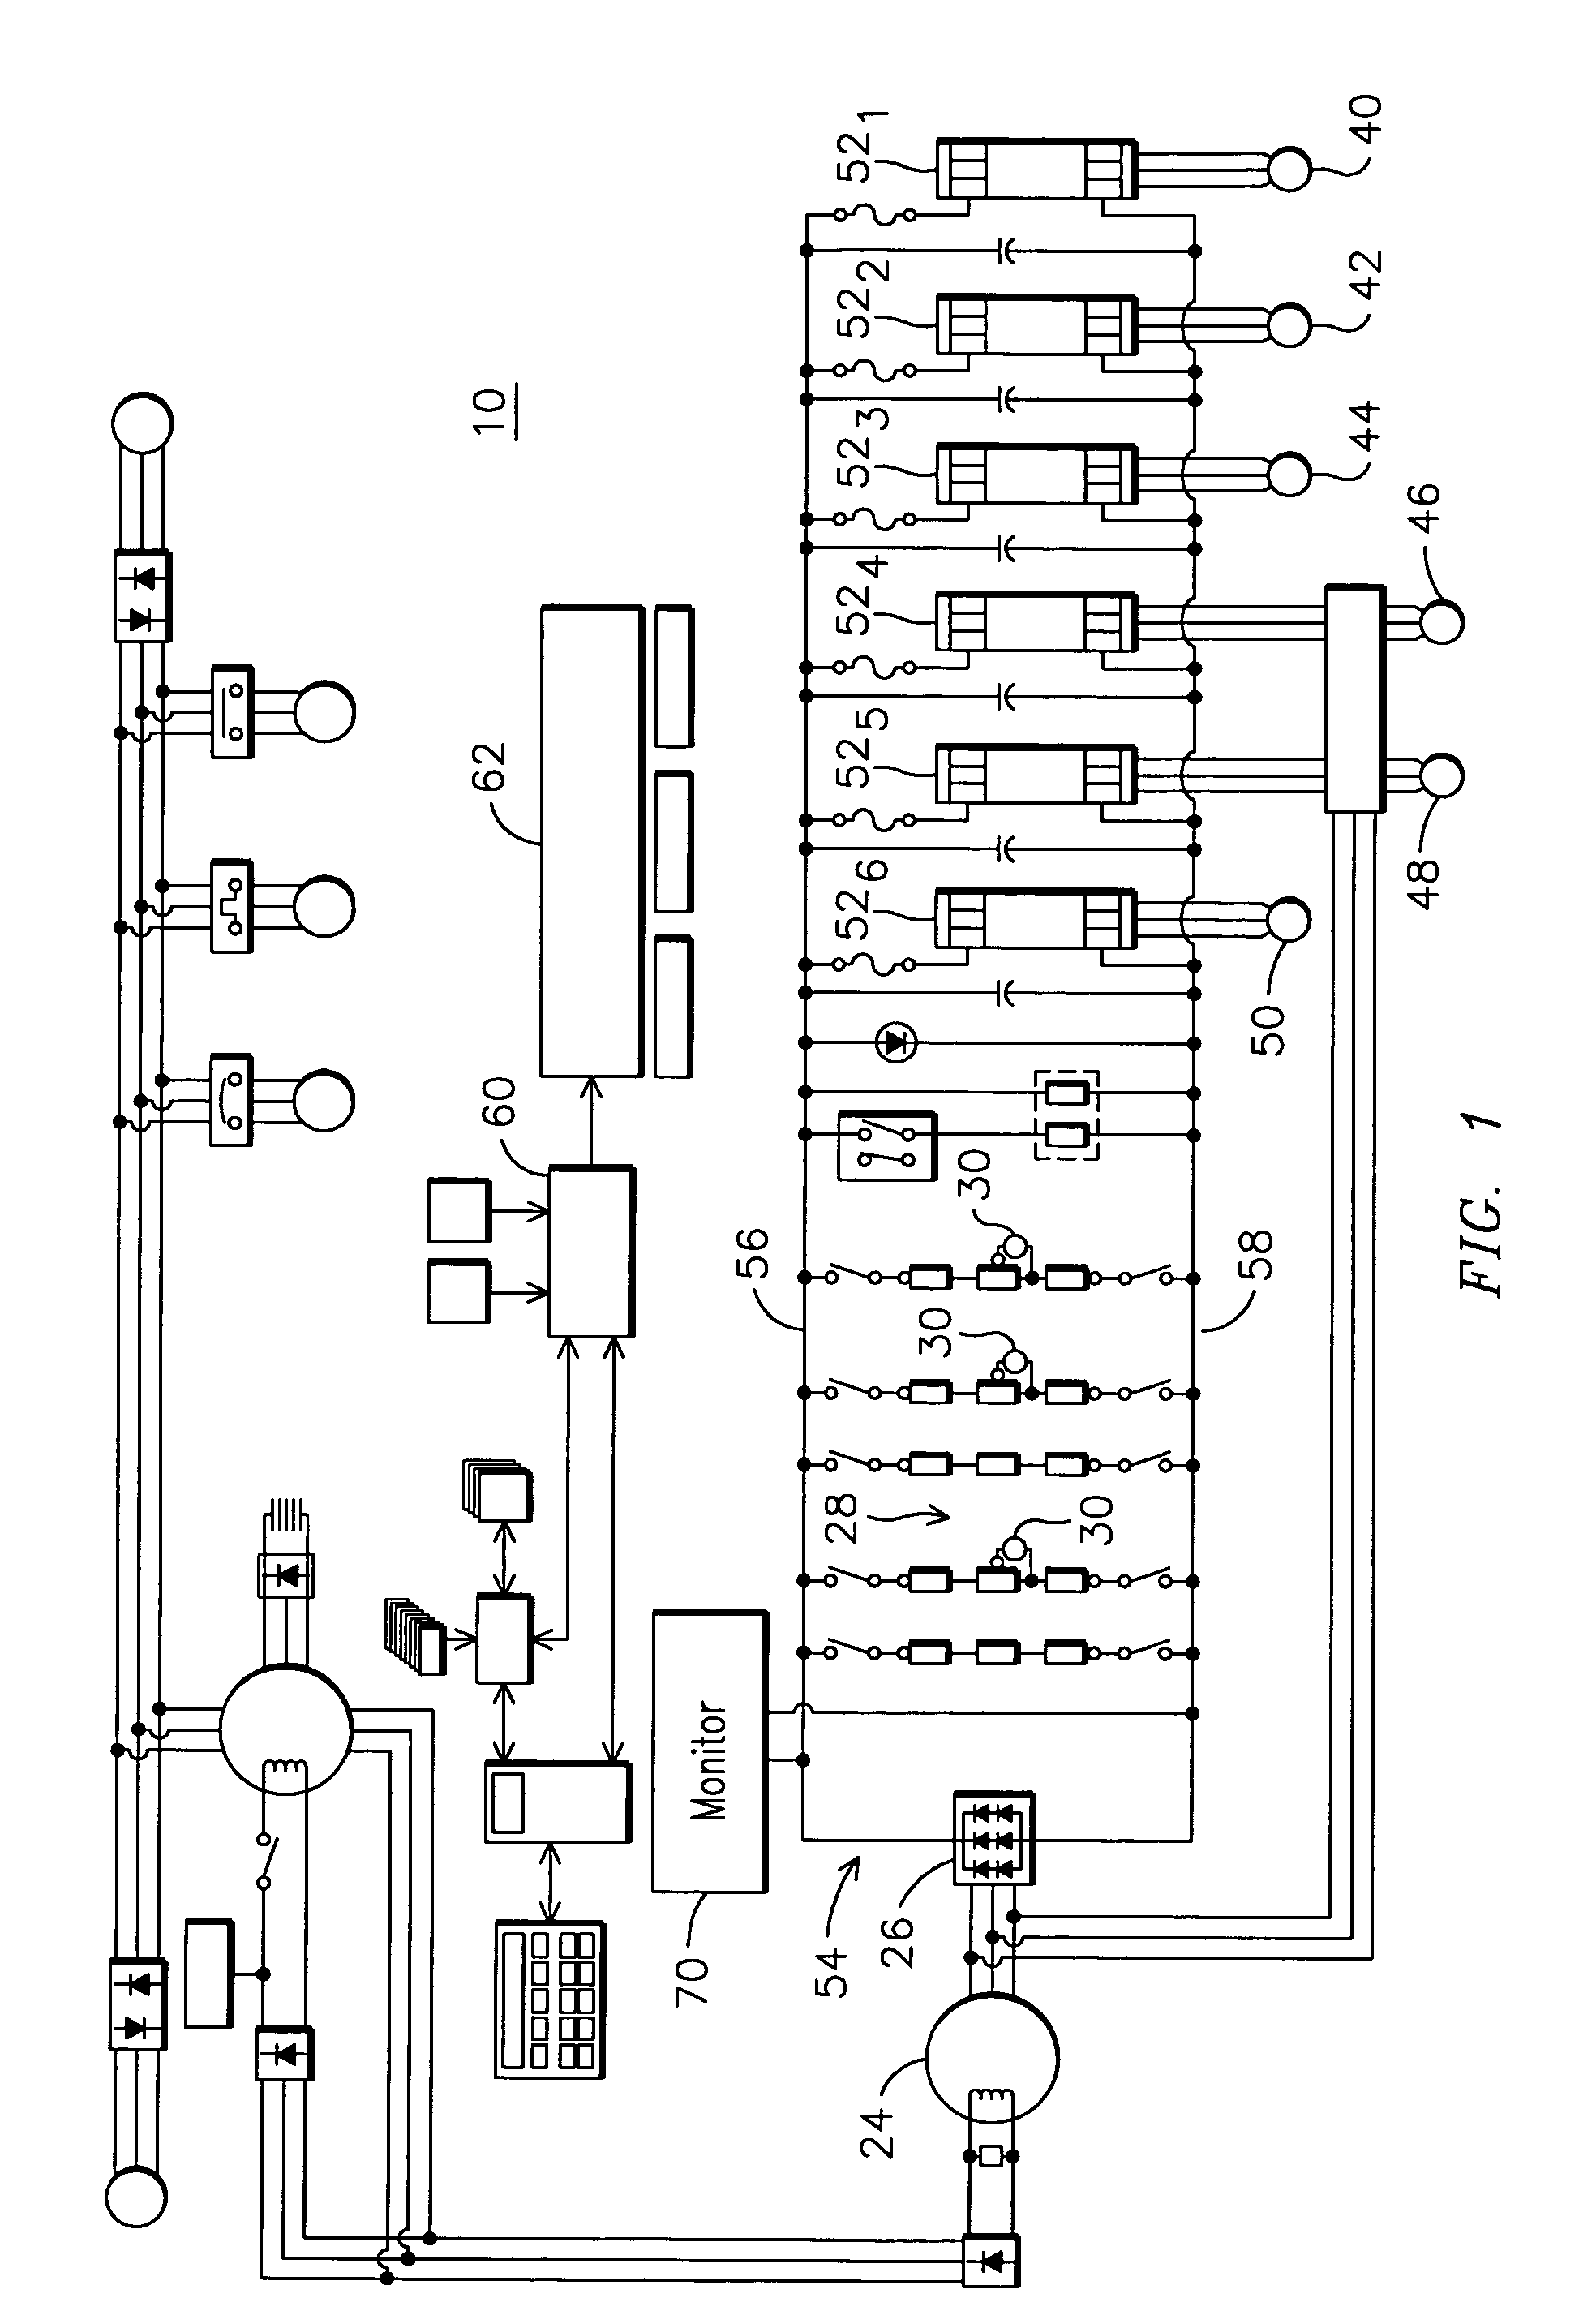 Method, apparatus and computer-readable code for magnifying an incipient ground fault and enable quick detection of such fault